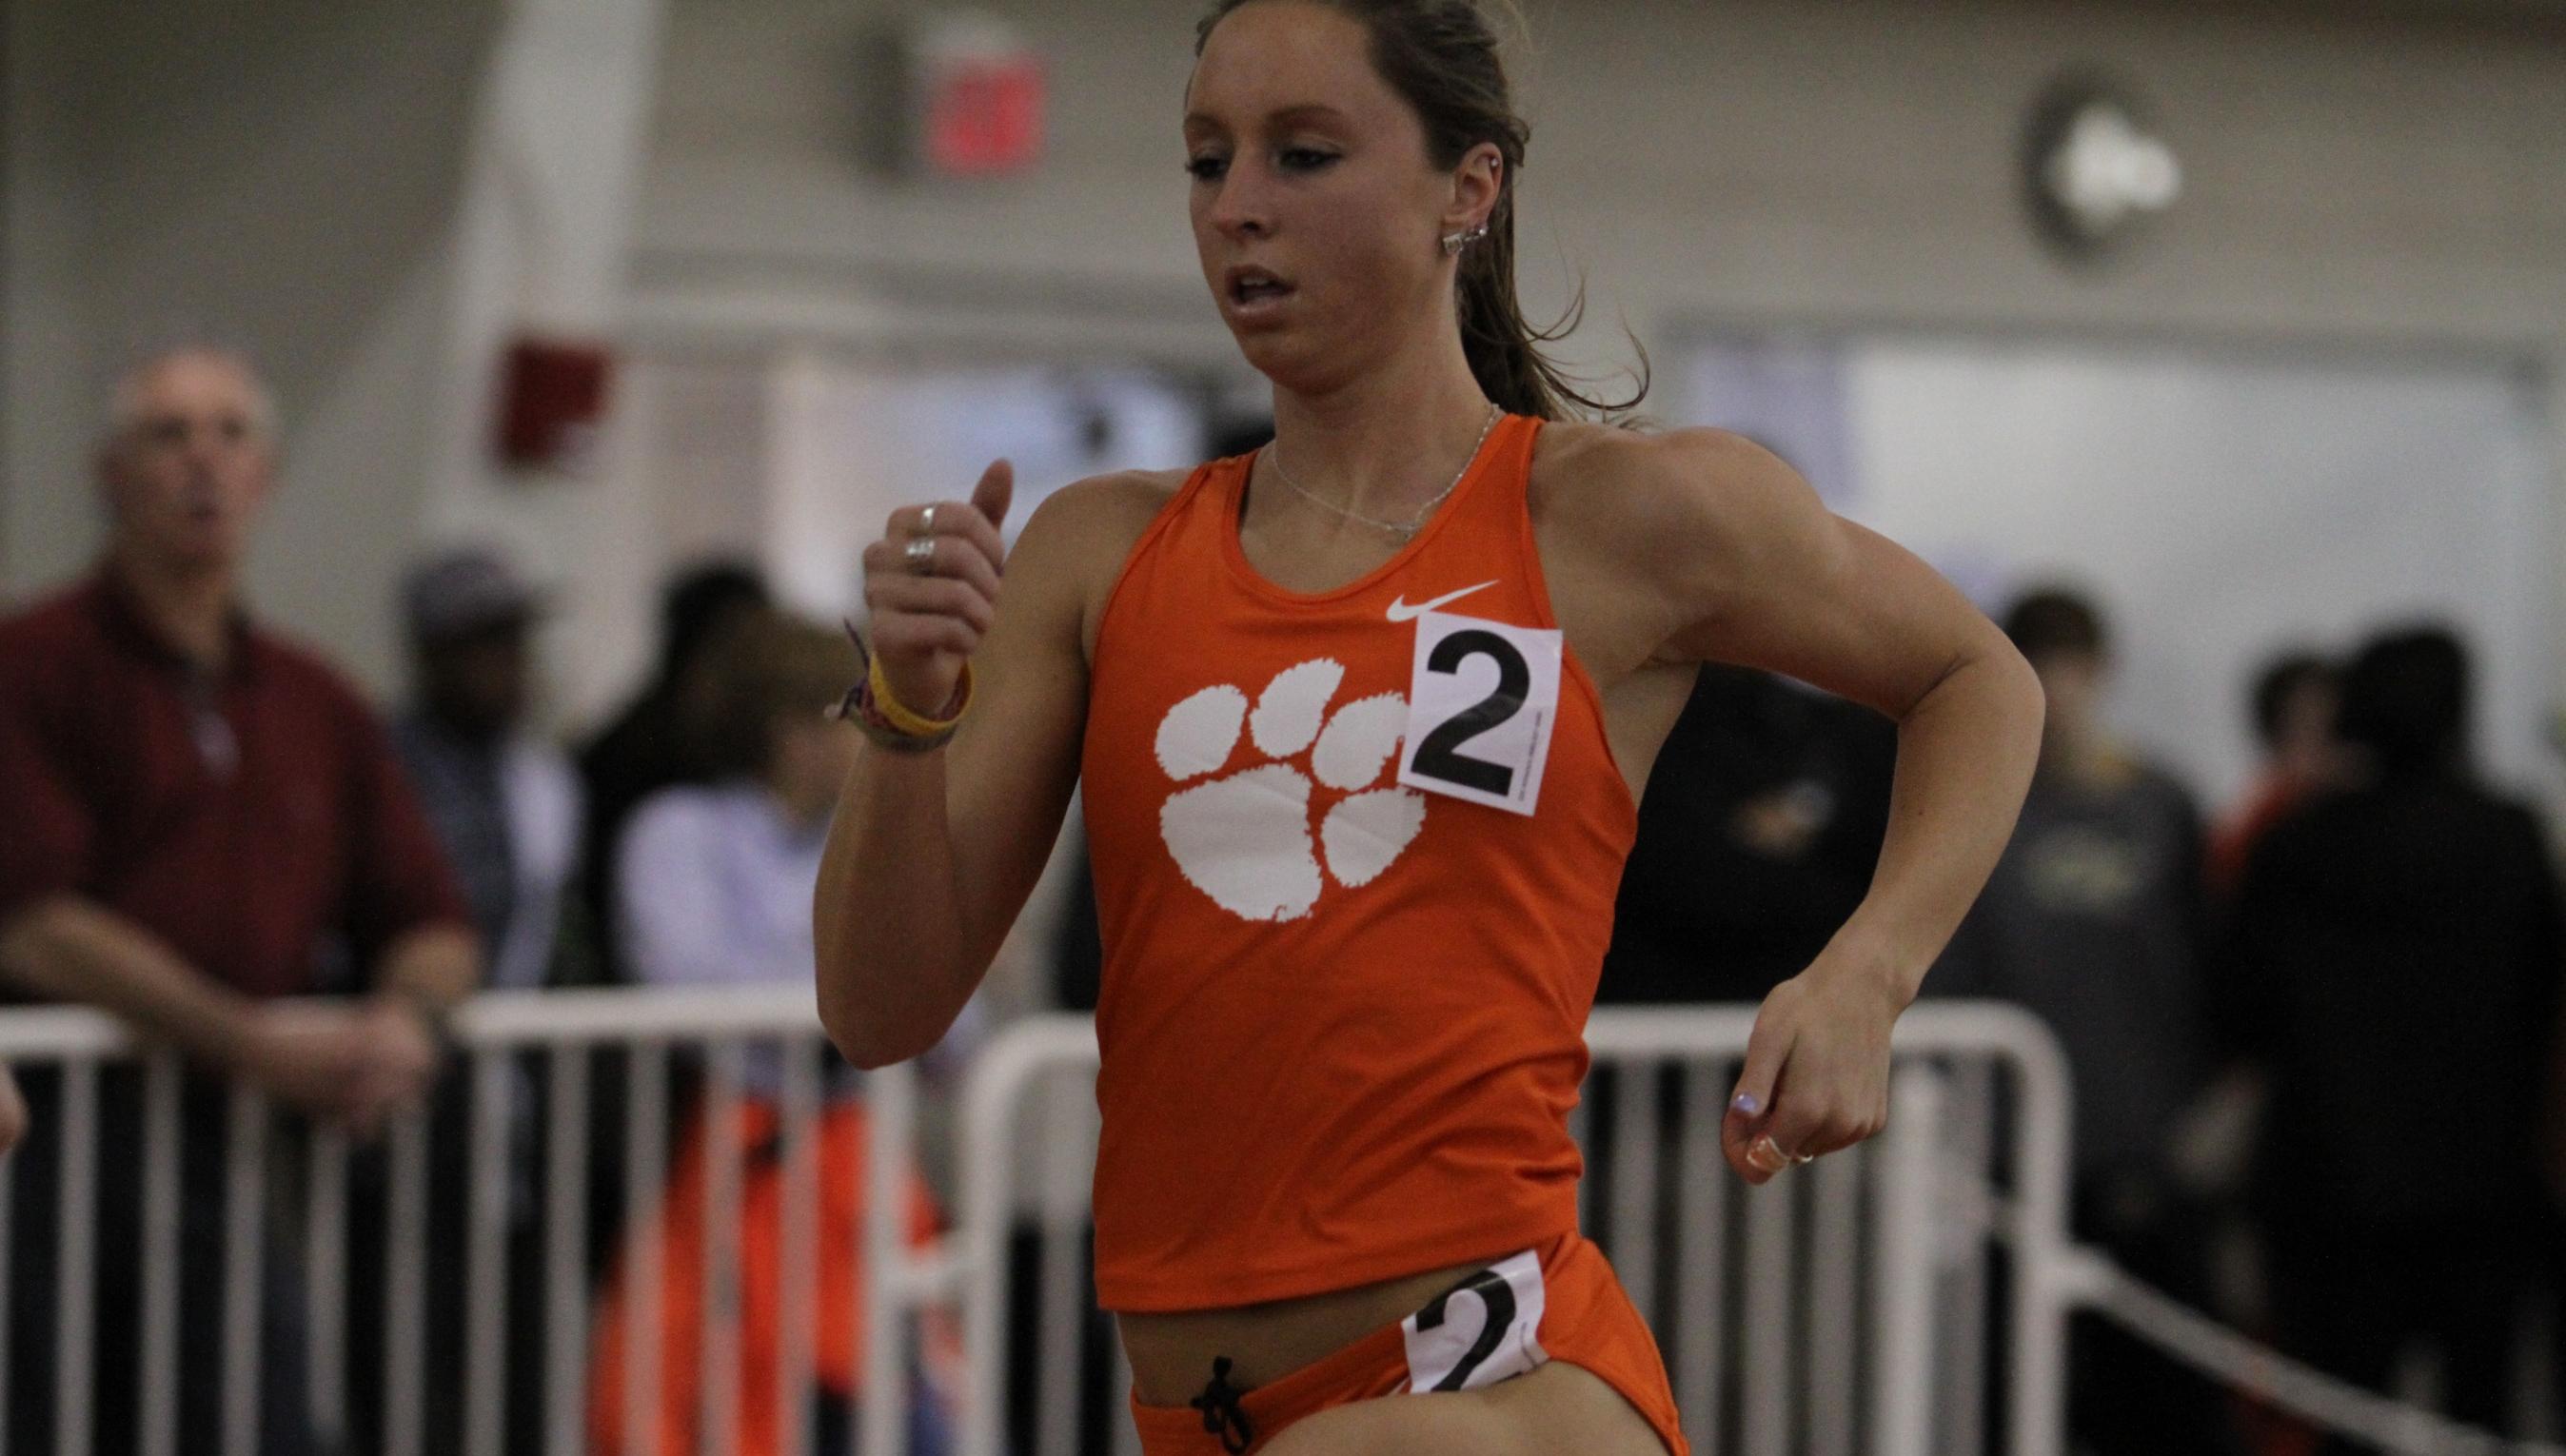 Blanton, Ramirez Highlight Final Day of Action at The Armory